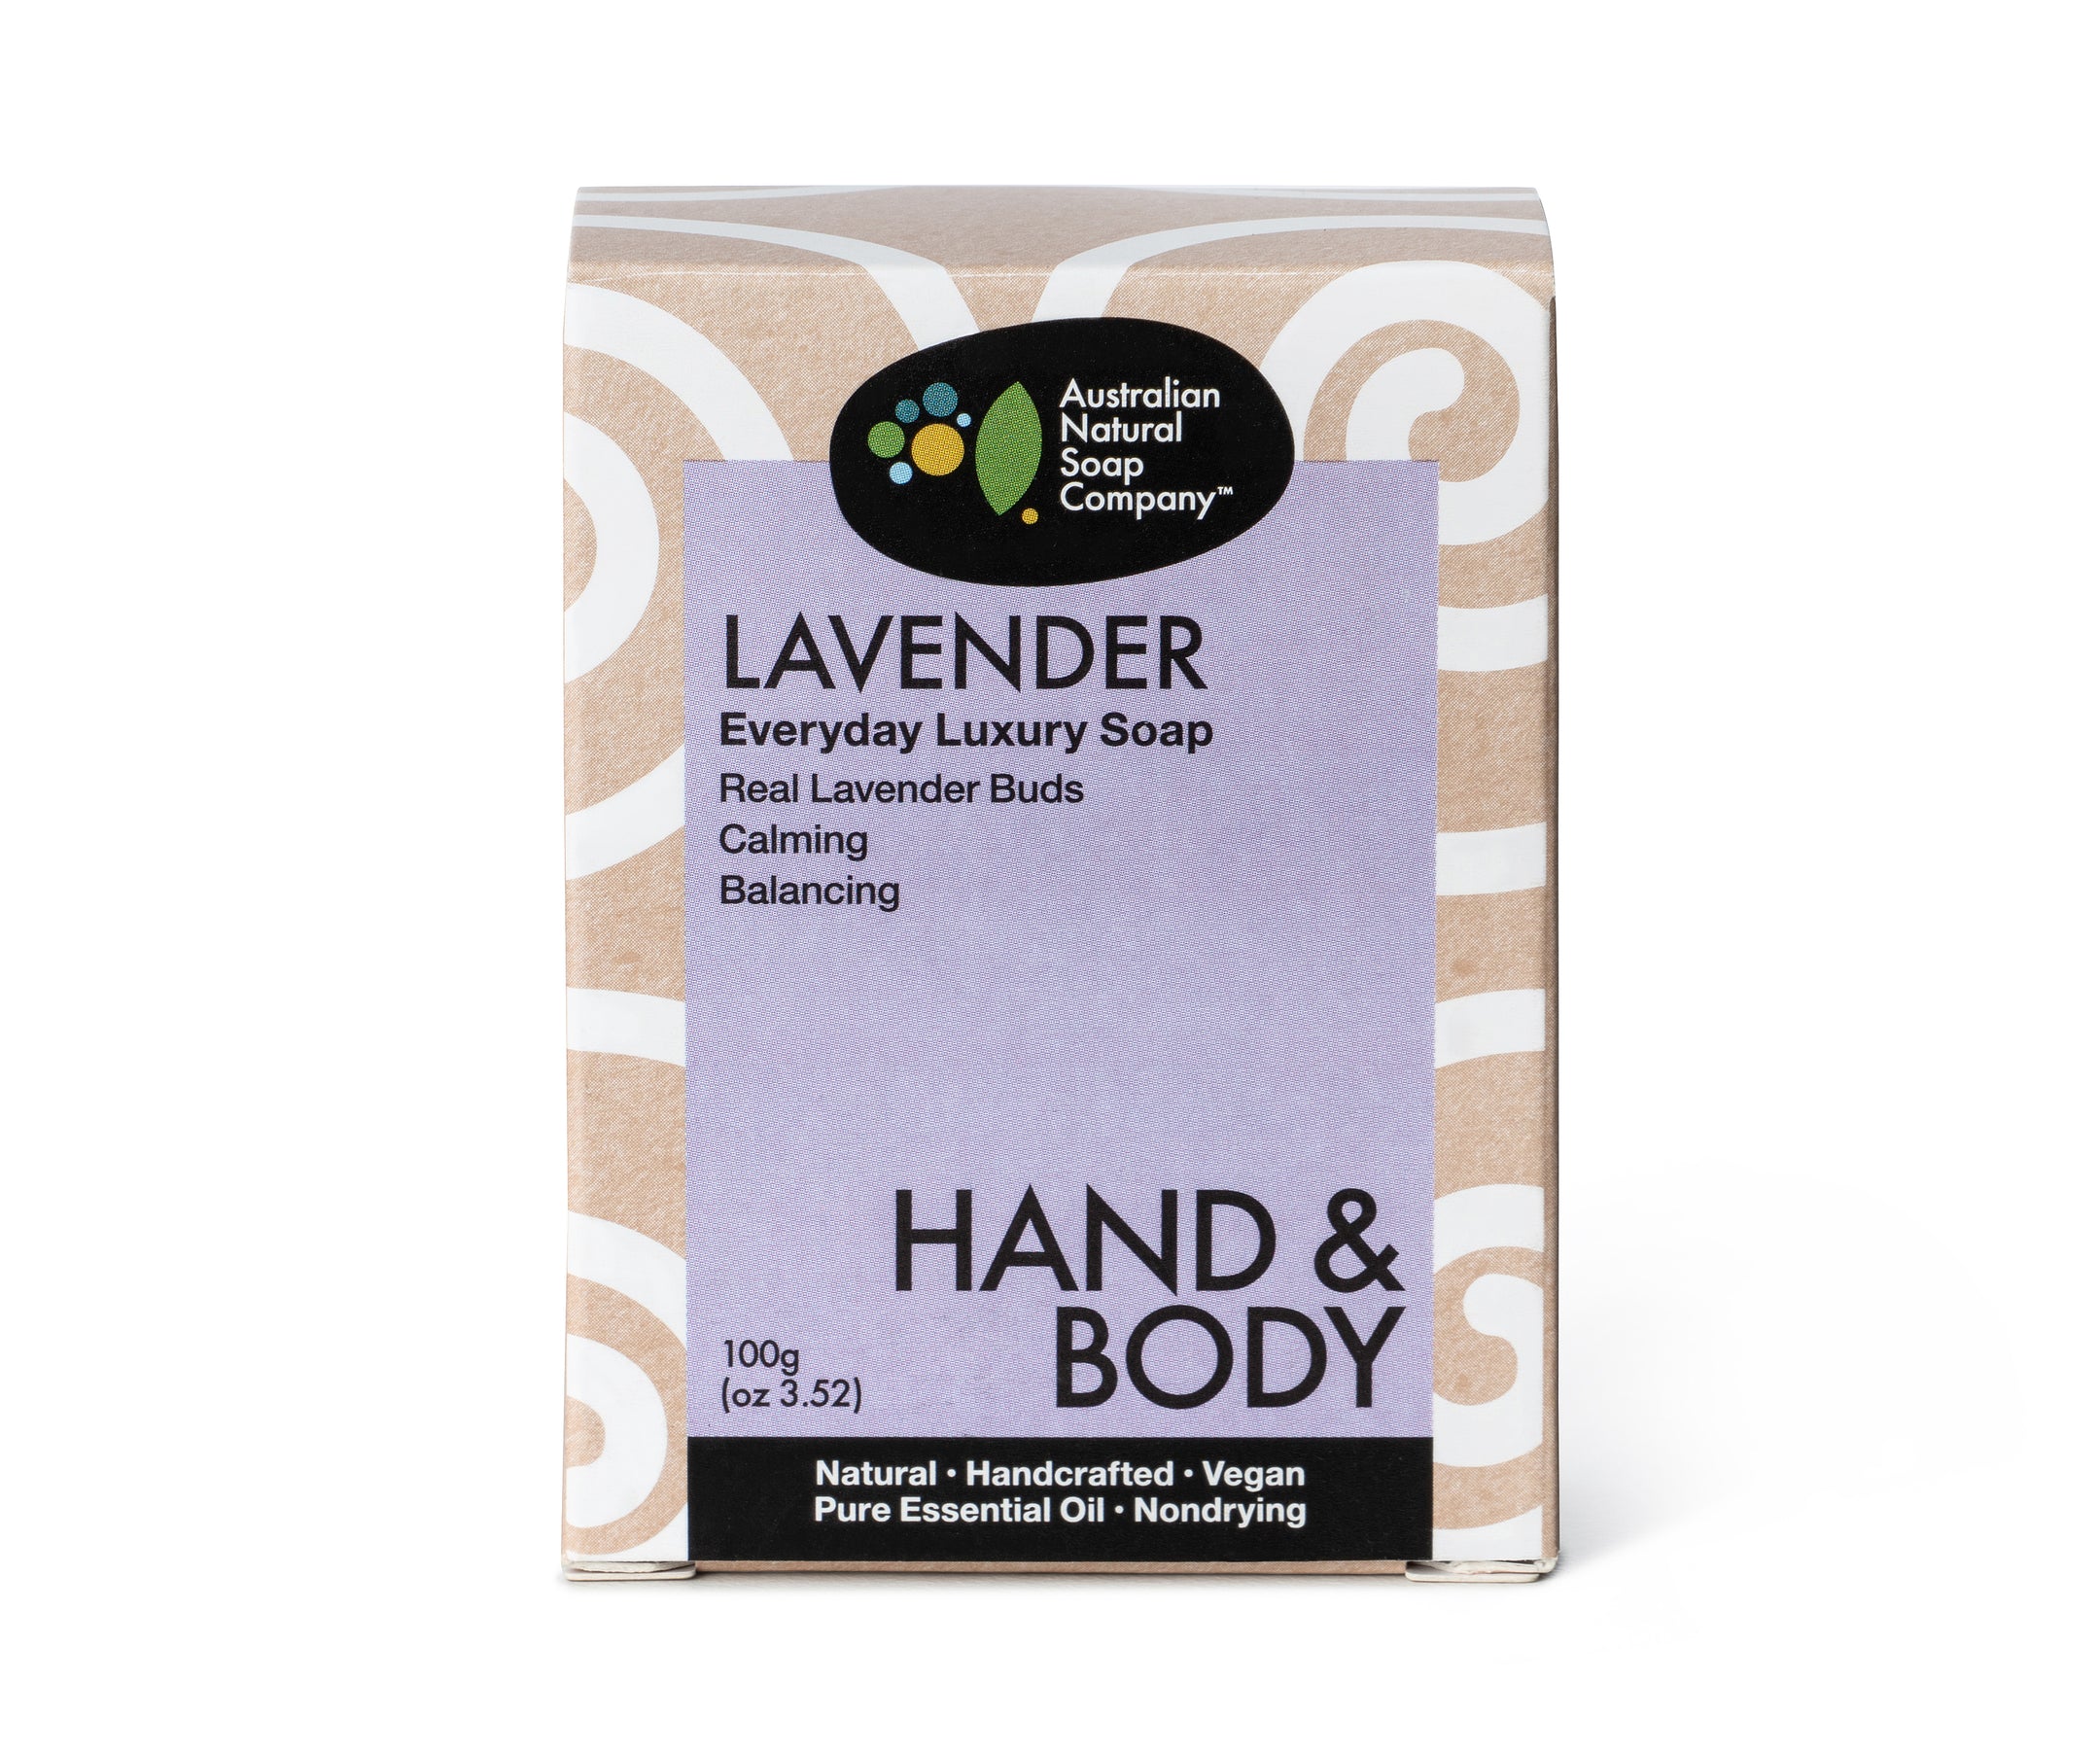 Australian Natural Soap Company handcrafted Lavender hand and body bar front of box